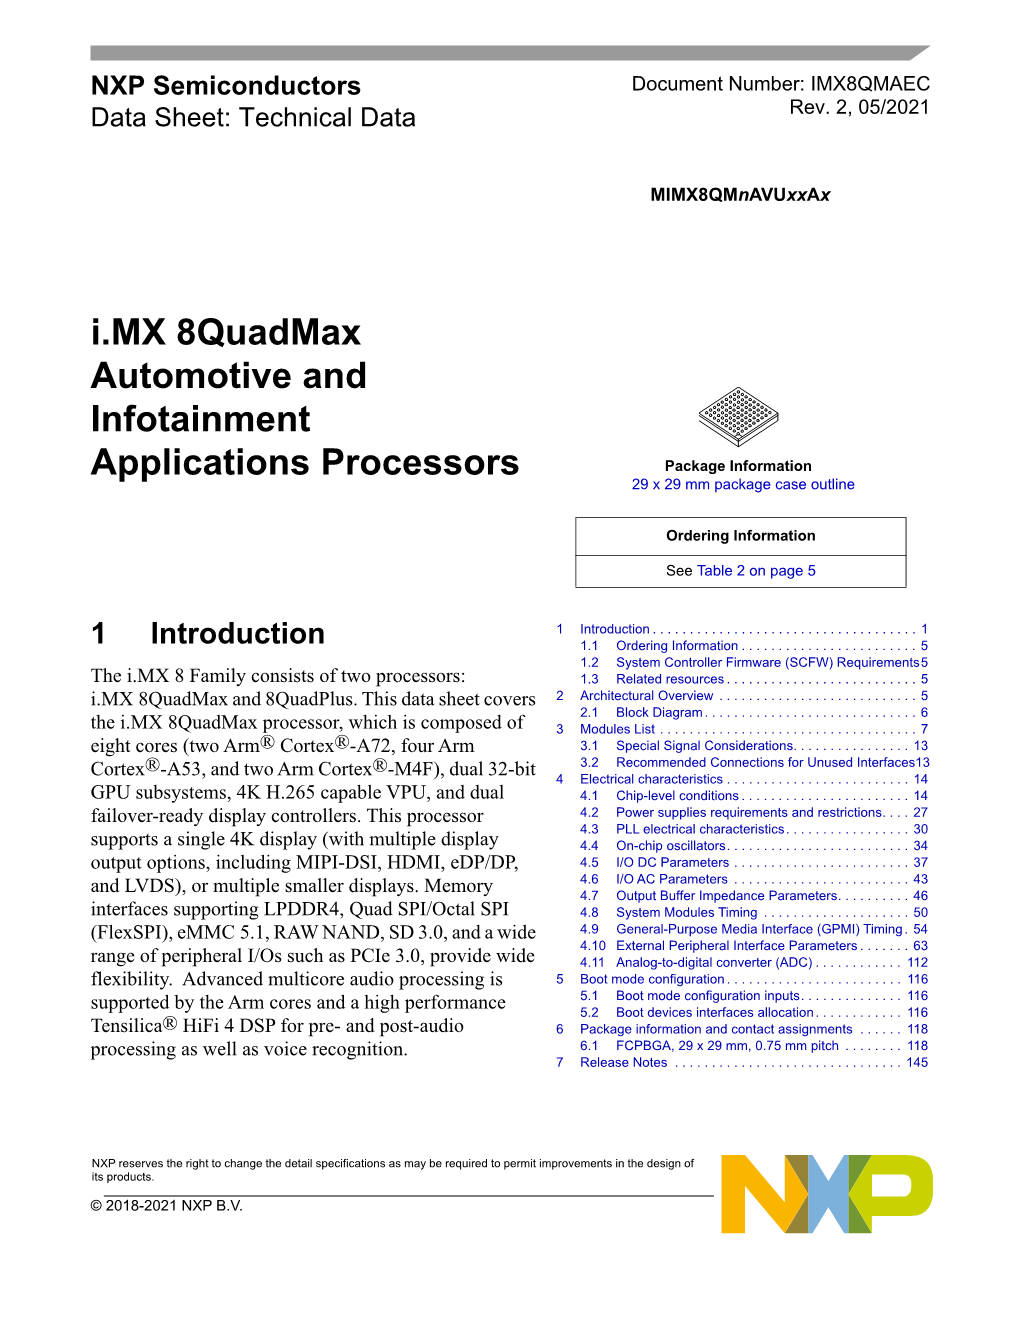 I.MX 8Quadmax Automotive and Infotainment Applications Processors Package Information 29 X 29 Mm Package Case Outline